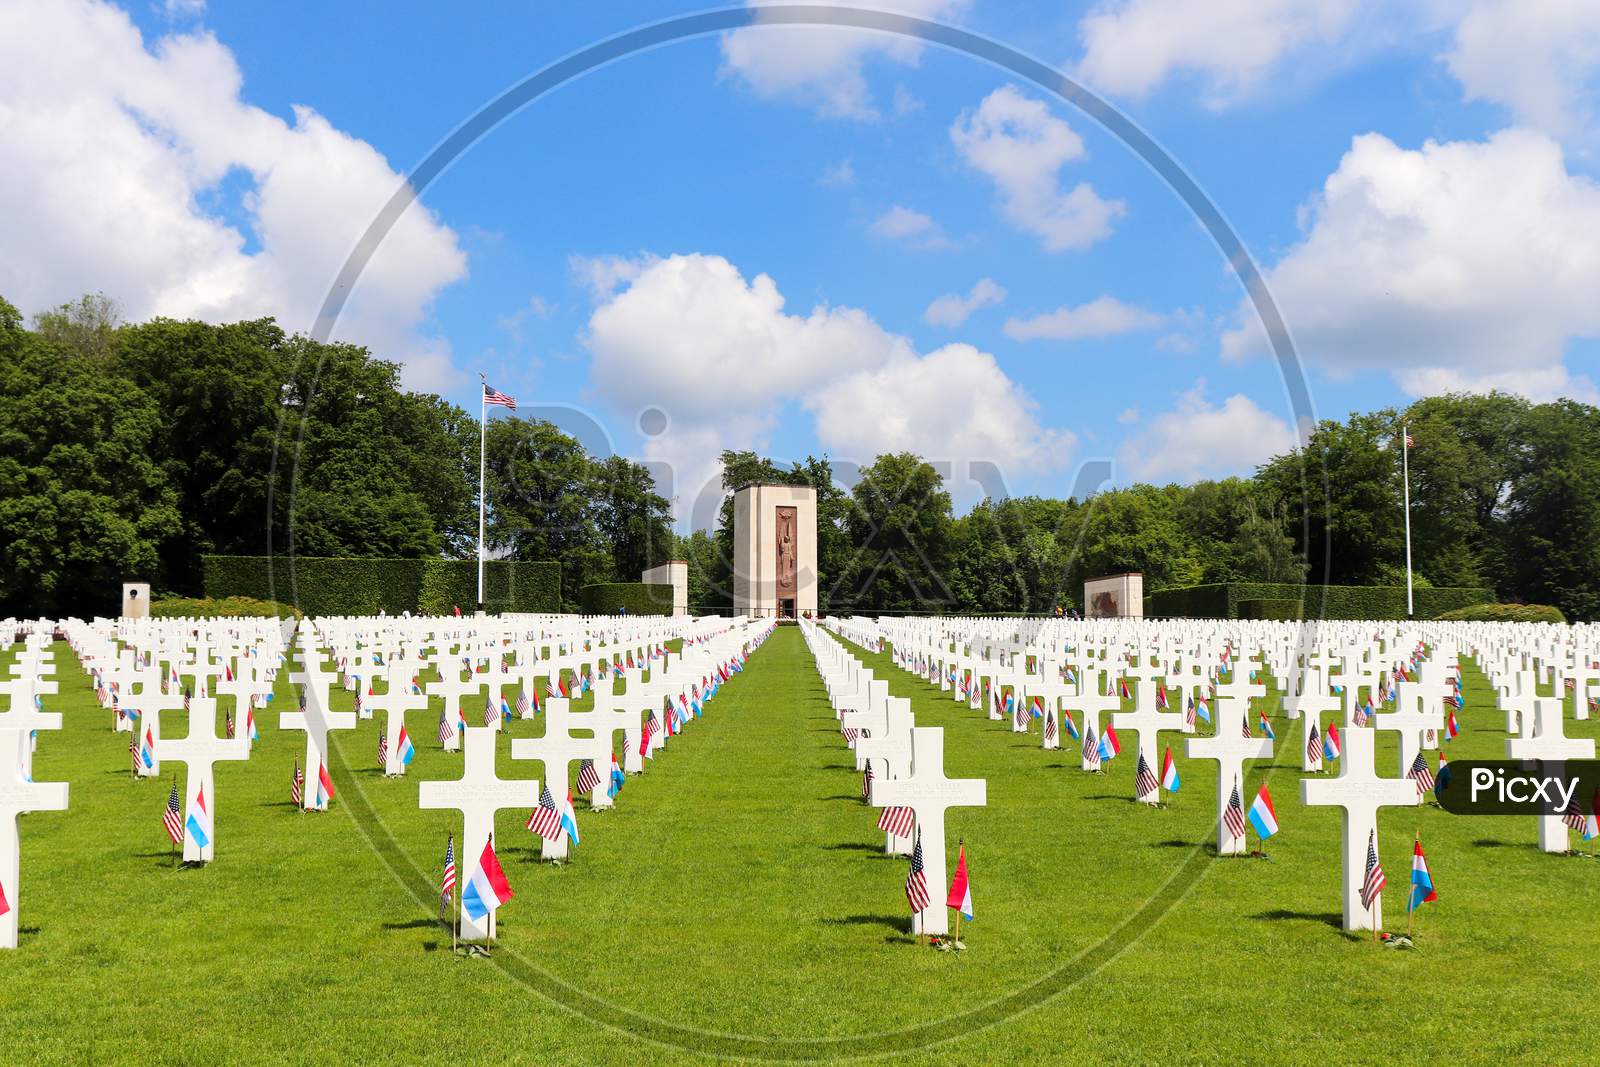 Rows Of Headstones At A Military Cemetery With A Chapel In The Backgound